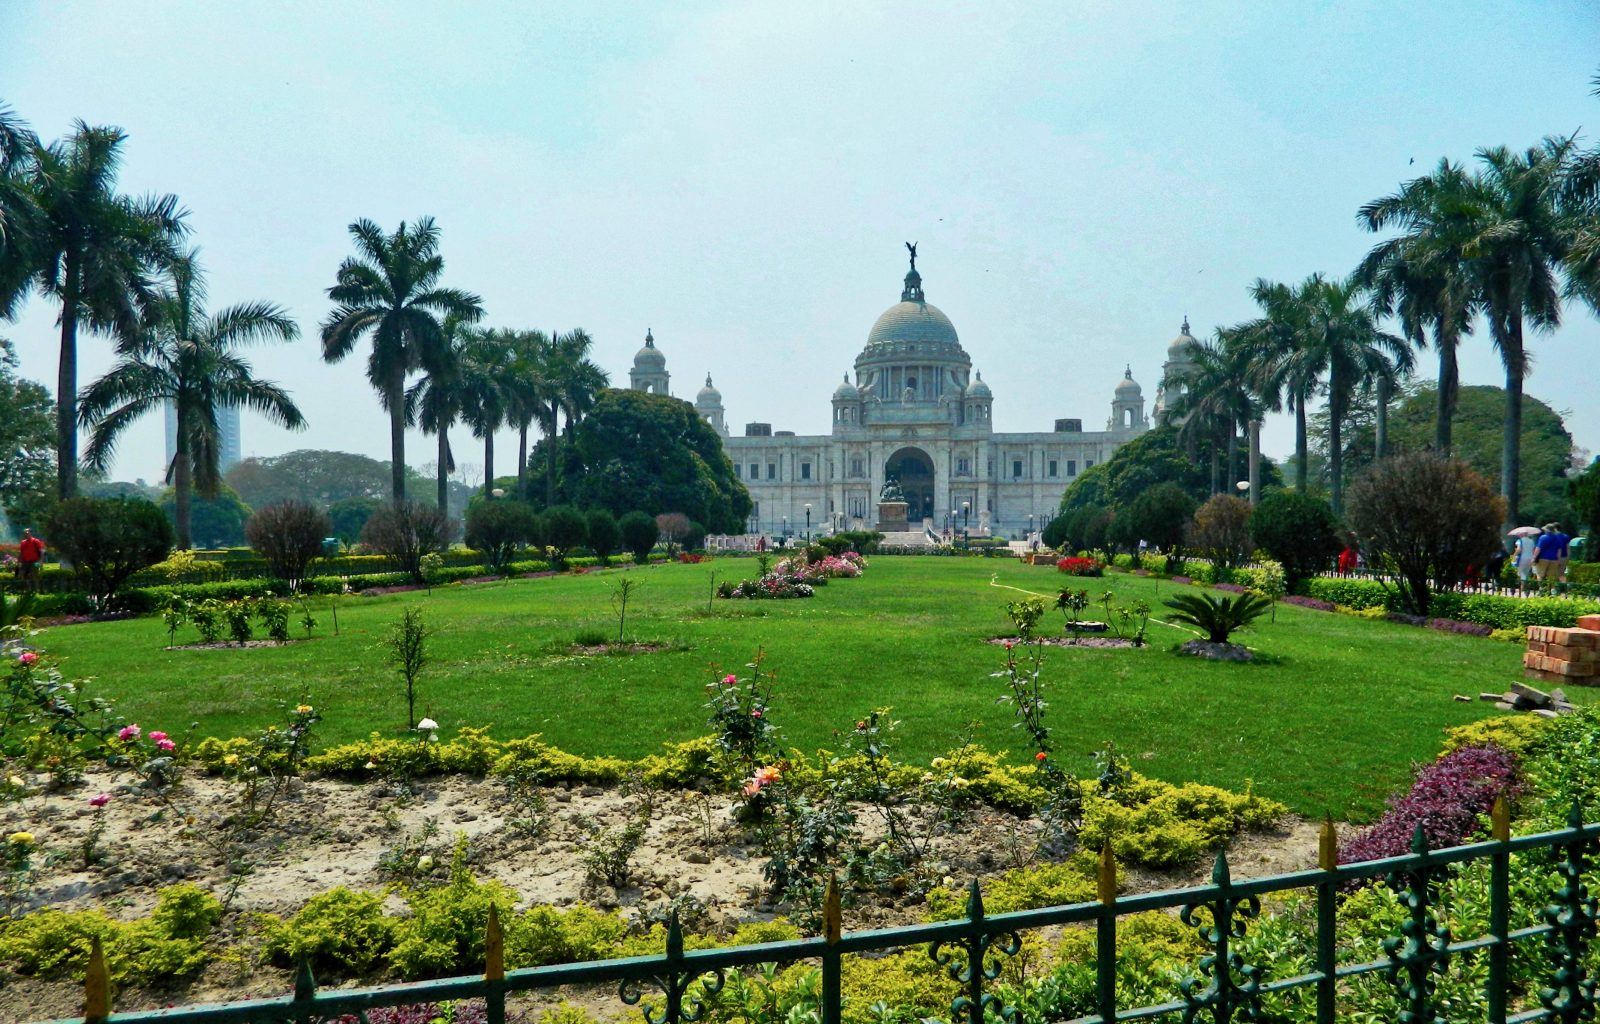 The name Kolkata is woven into the history of India. Create your own Kolkata day tour to really see the best of this historic city! | Kolkata West Bengal | Kolkata India | Calcutta India | Visit Kolkata | #kolkataindia #kolkata #visitkolkata